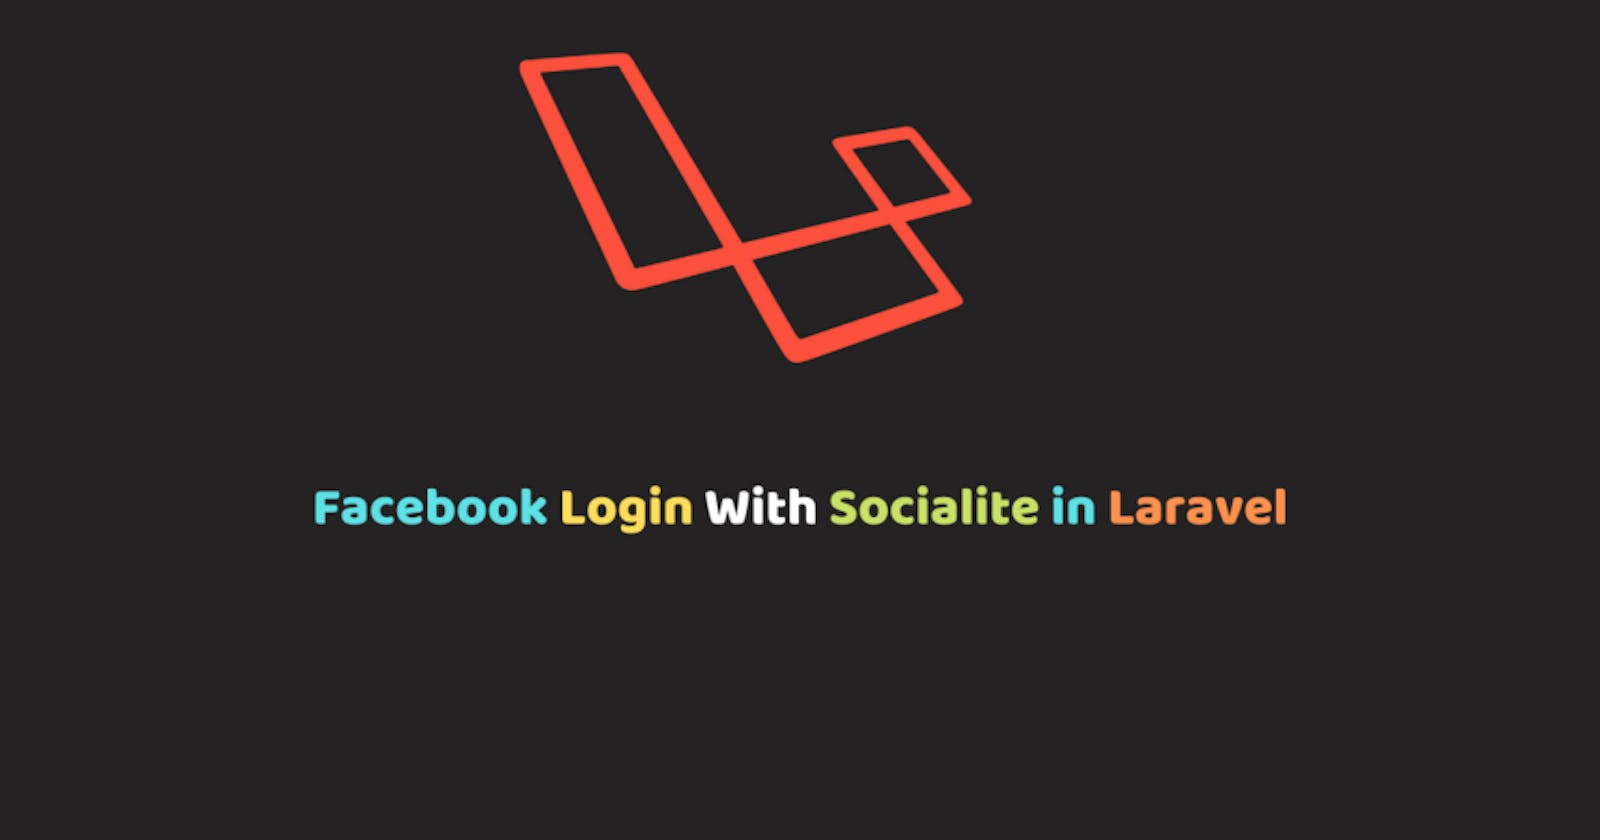 How to setup Facebook Login With Socialite in Laravel